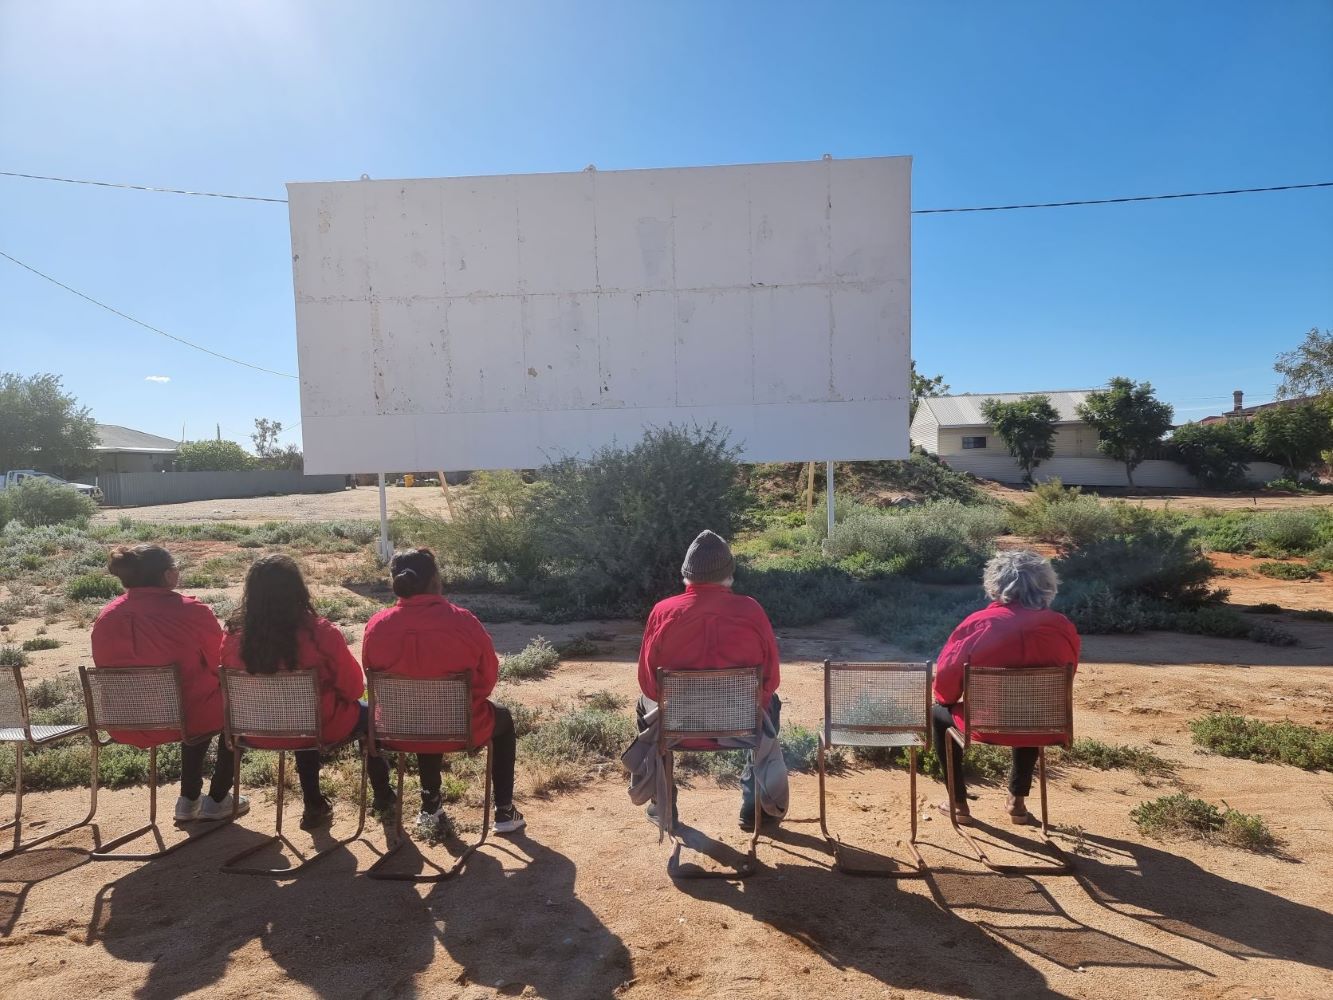 Women sitting in an abandoned outdoor movie place